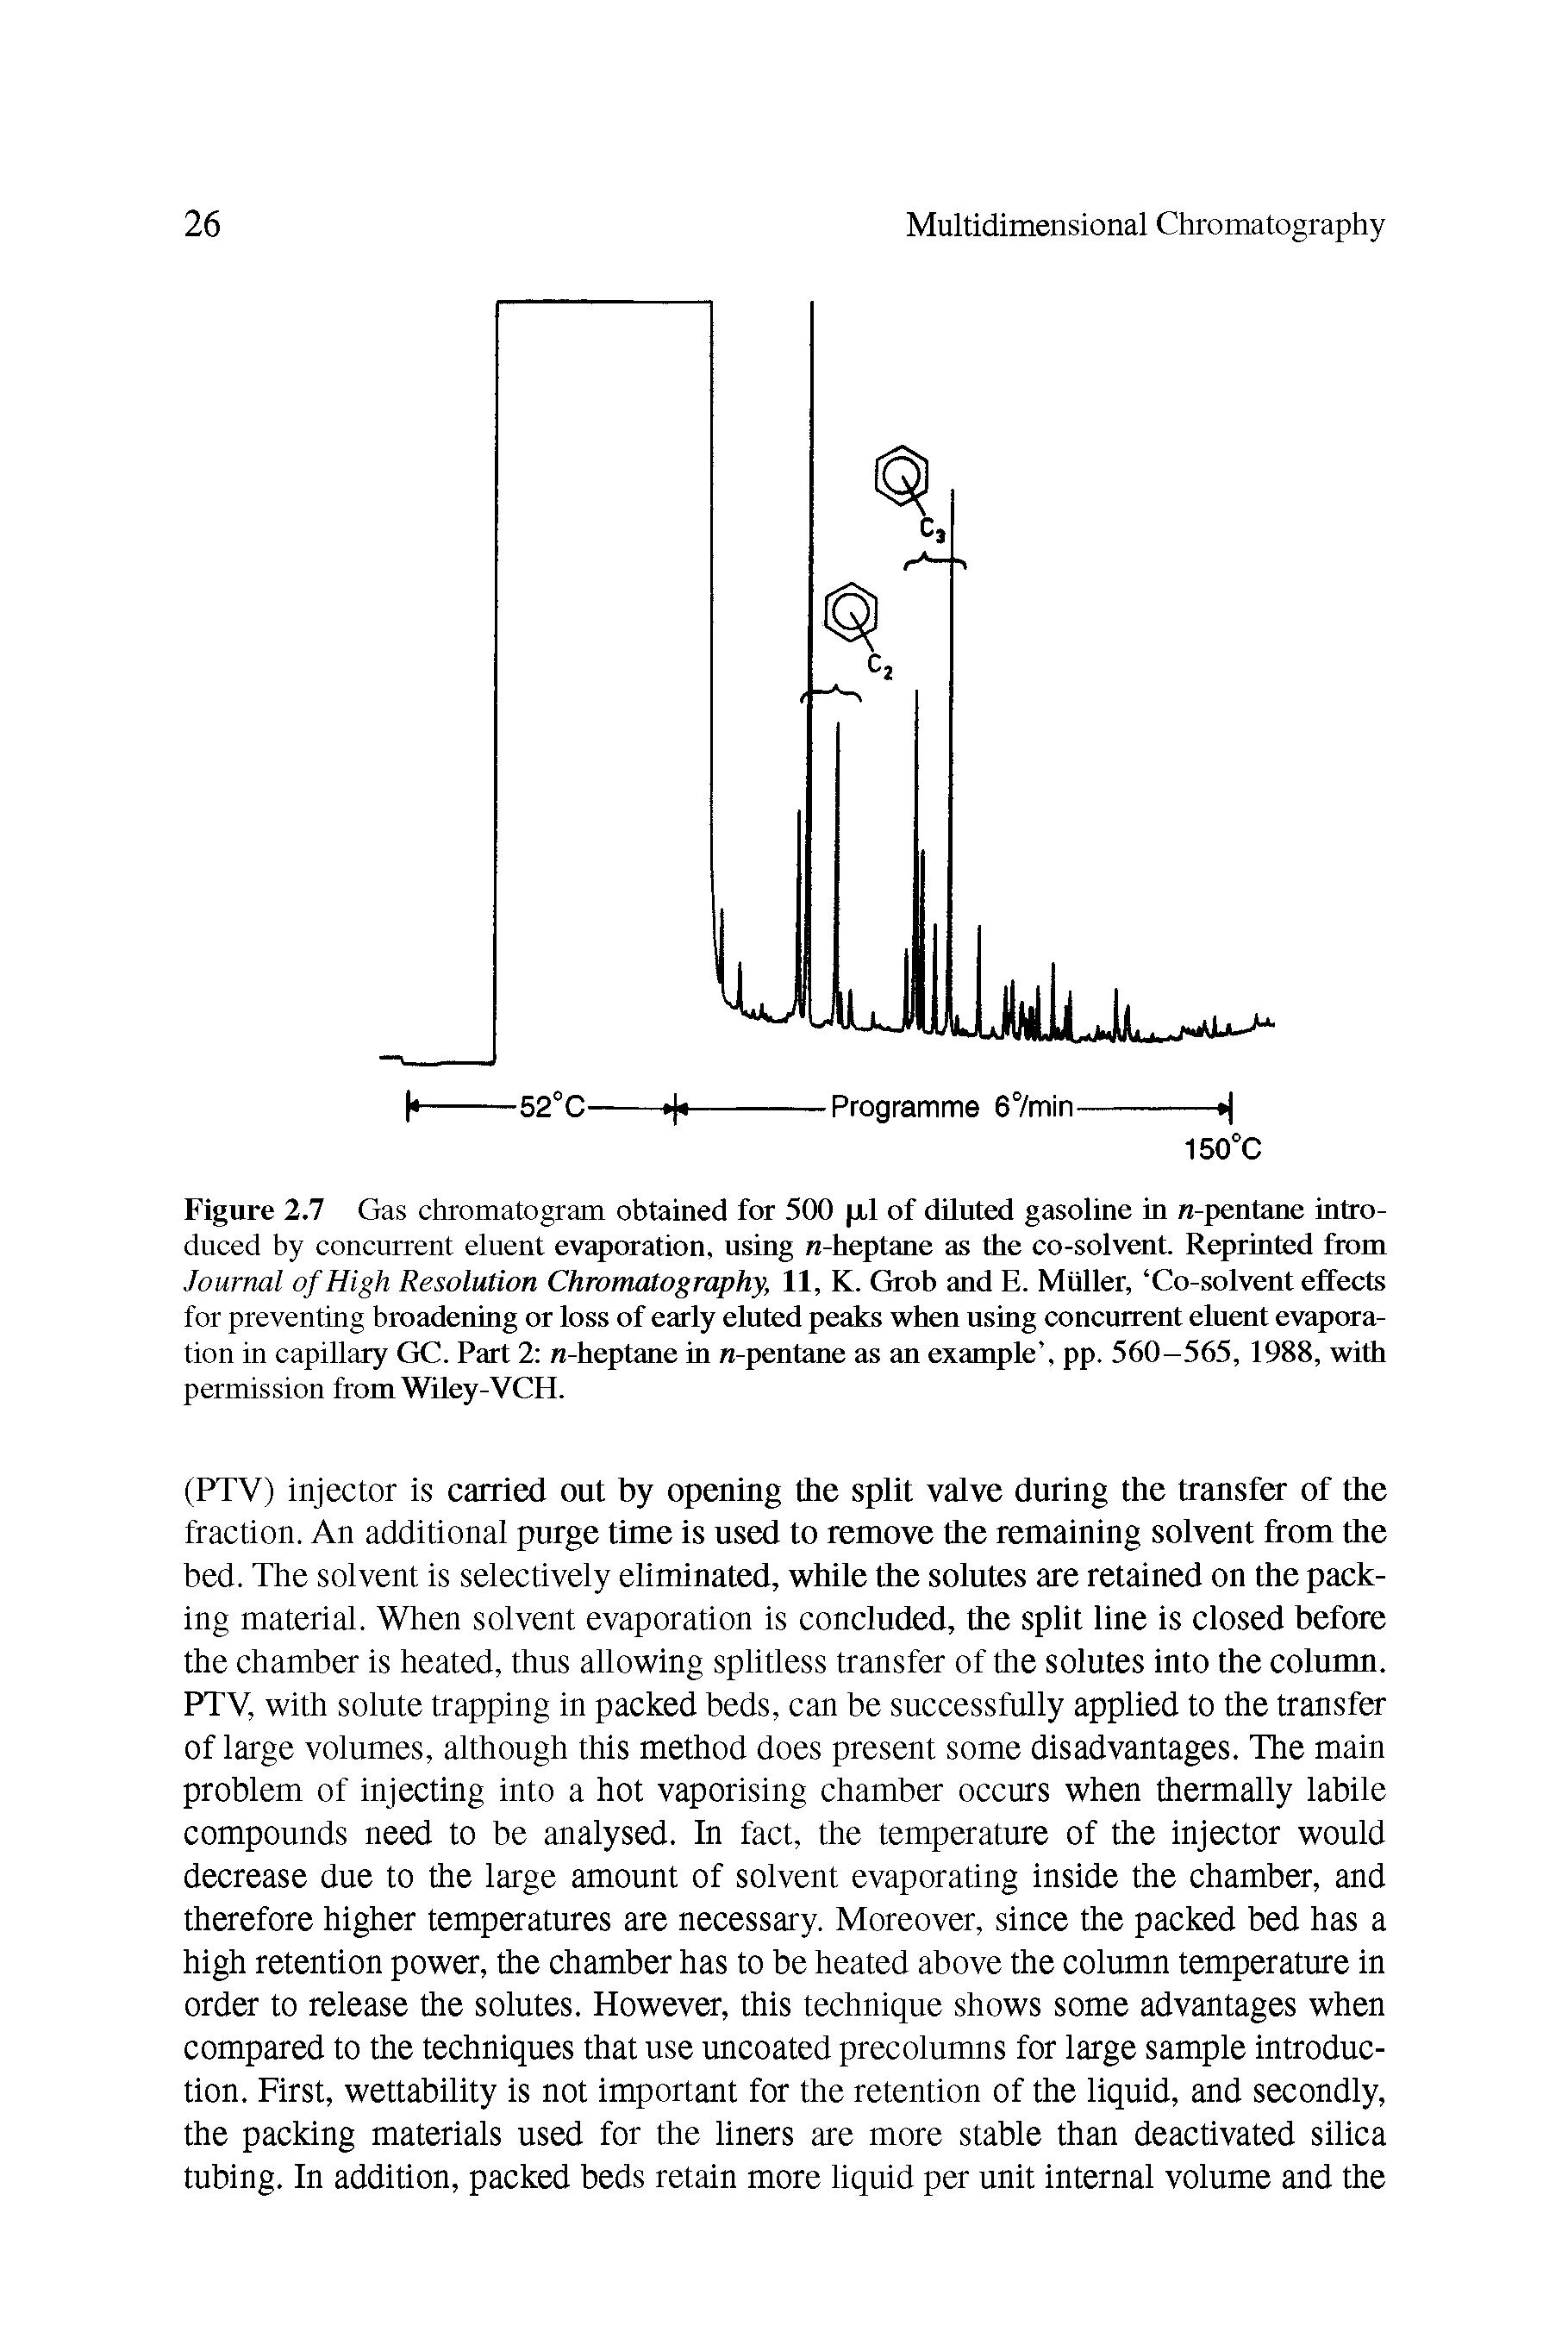 Figure 2.7 Gas chromatogram obtained for 500 p.1 of diluted gasoline in n-pentane introduced by concurrent eluent evaporation, using n-heptane as the co-solvent. Reprinted from Journal of High Resolution Chromatography, 11, K. Grob and E. Muller, Co-solvent effects for preventing broadening or loss of early eluted peaks when using concurrent eluent evaporation in capillary GC. Part 2 n-heptane in n-pentane as an example , pp. 560-565, 1988, with permission from Wiley-VCH.